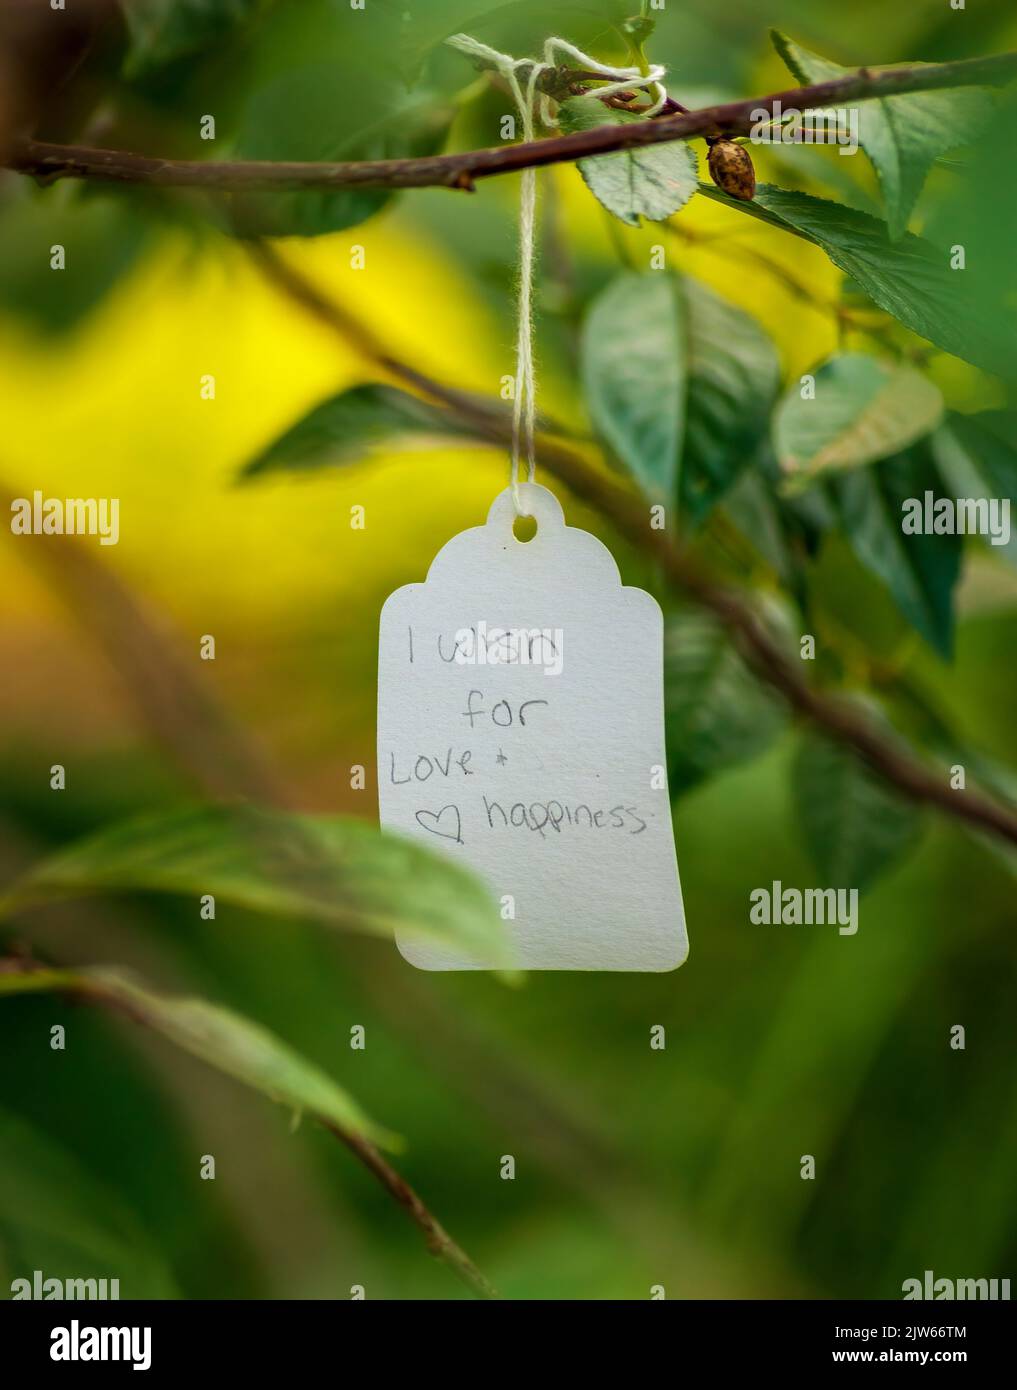 “I wish for love & happiness” – a wish written on a paper tag and tied to a twig on the Wishing Tree, at Berkshire Botanical Garden. Stockbridge, MA. Stock Photo